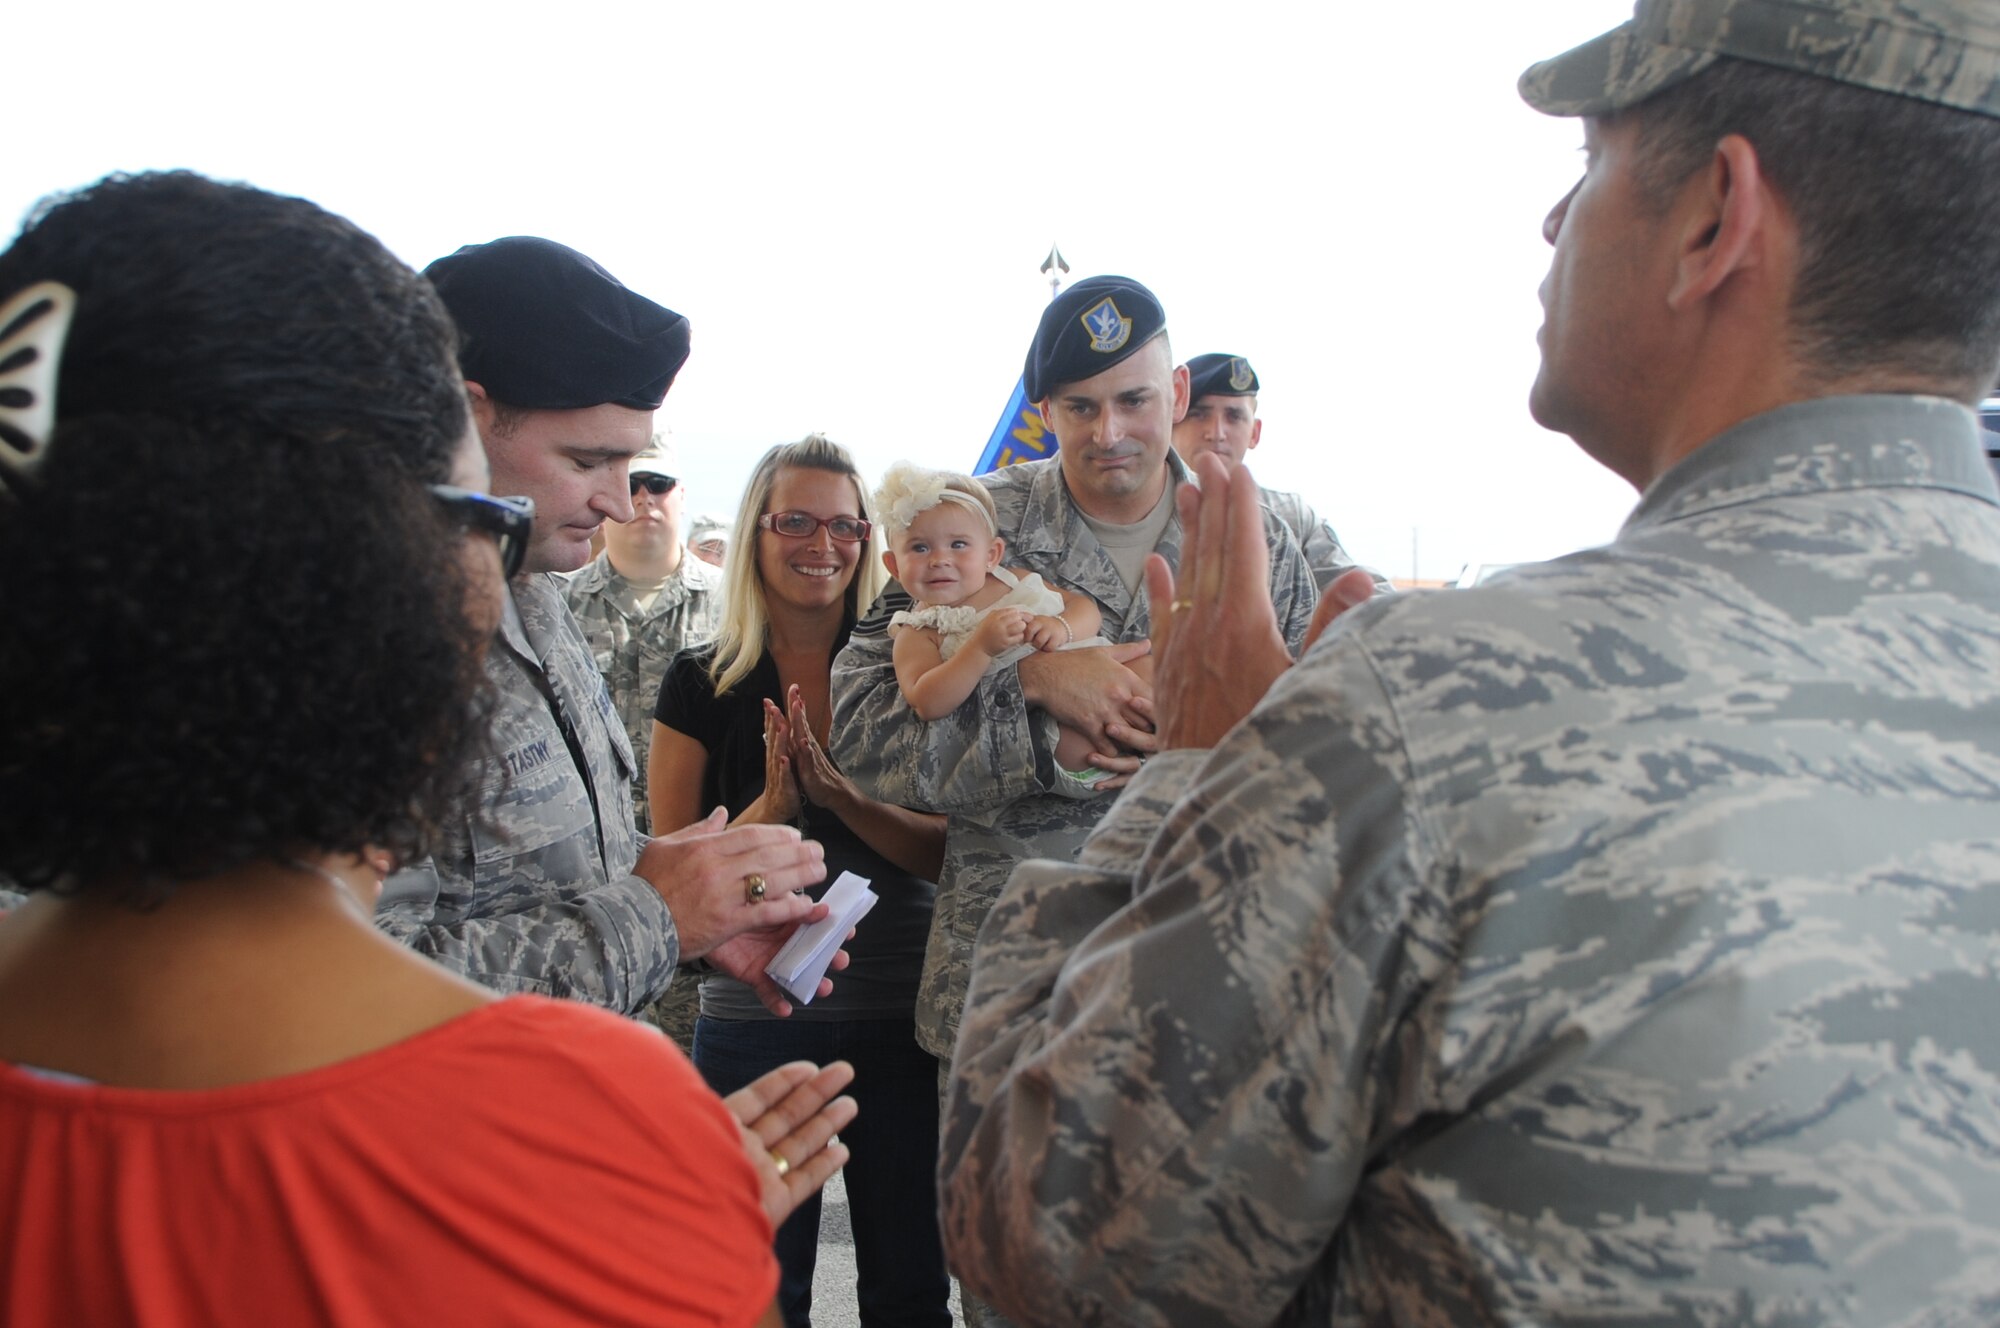 Members of Team Lajes led by Col. Jose Rivera, 65th Air Base Wing commander, greet Master Sgt. Nikki Drago, 65th Security Force Squadron defender, during a “warrior-welcome” held for Sergeant Drago and his family at the Top of the Rock Club’s entrance Aug. 11, 2011.  Sergeant Drago returned to Lajes after a seven-month deployment to the Transit Center at Manas, Kyrgyzstan.  (Photo by Staff Sgt. Olufemi Owolabi)